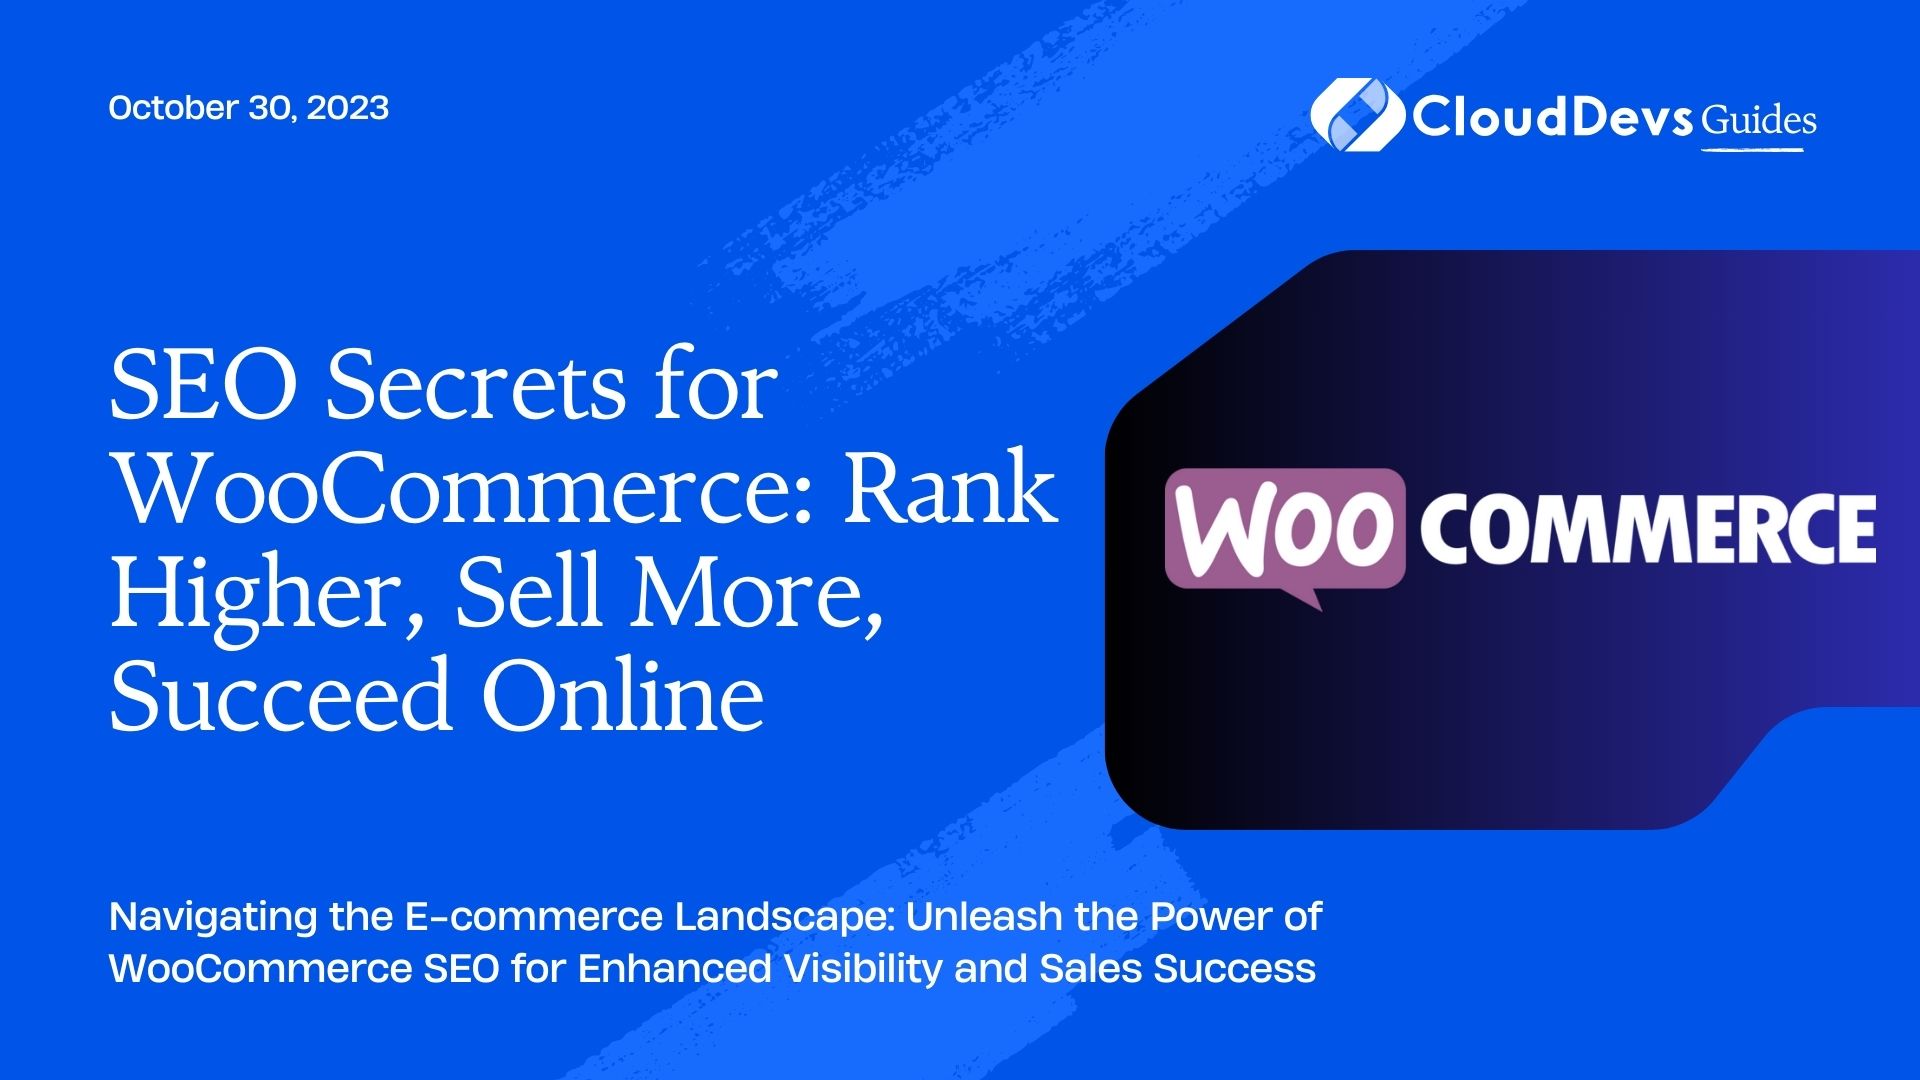 SEO Secrets for WooCommerce: Rank Higher, Sell More, Succeed Online